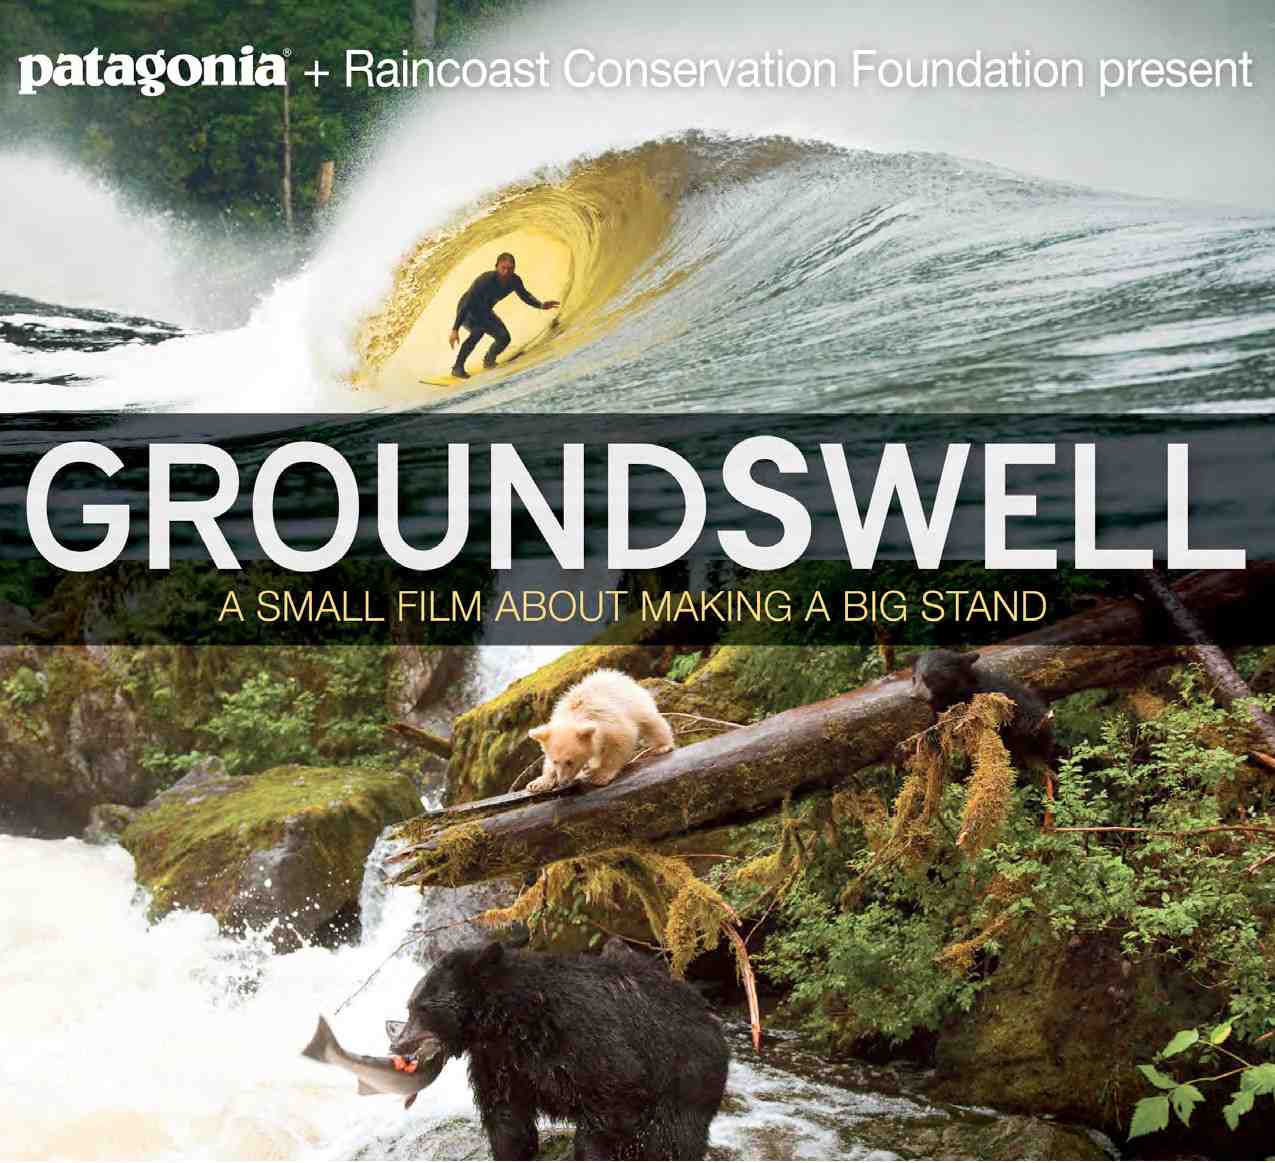 A poster advertising the documentary Groundswell